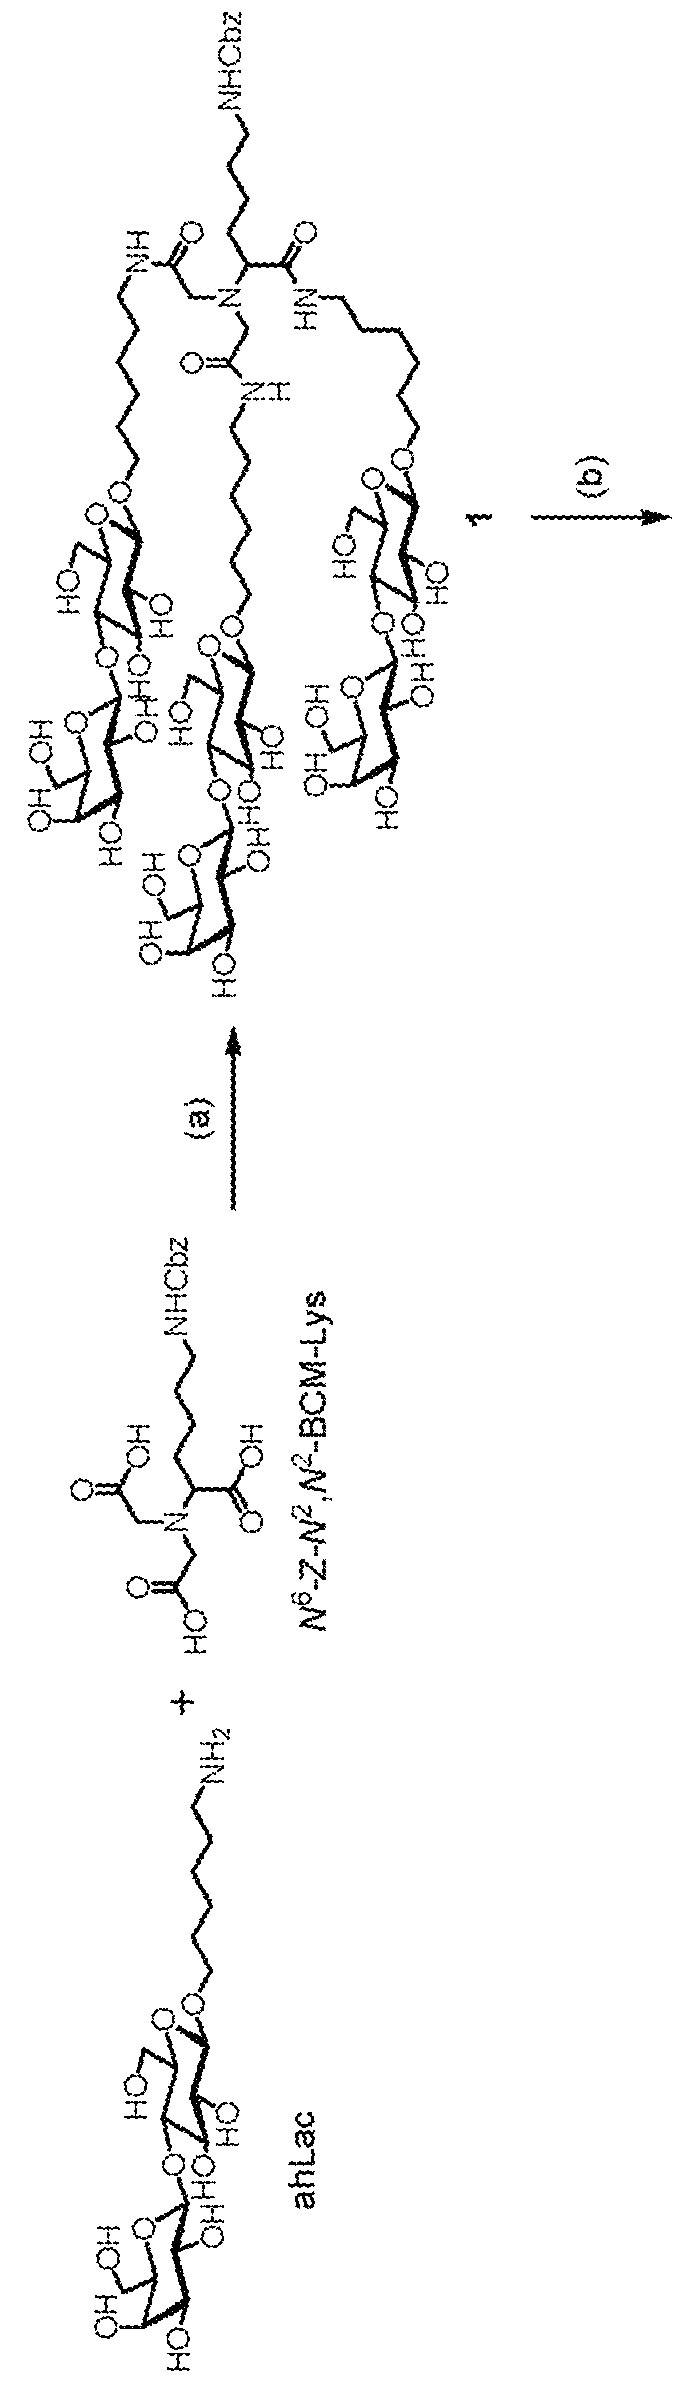 Gall bladder imaging agent and its preparation method